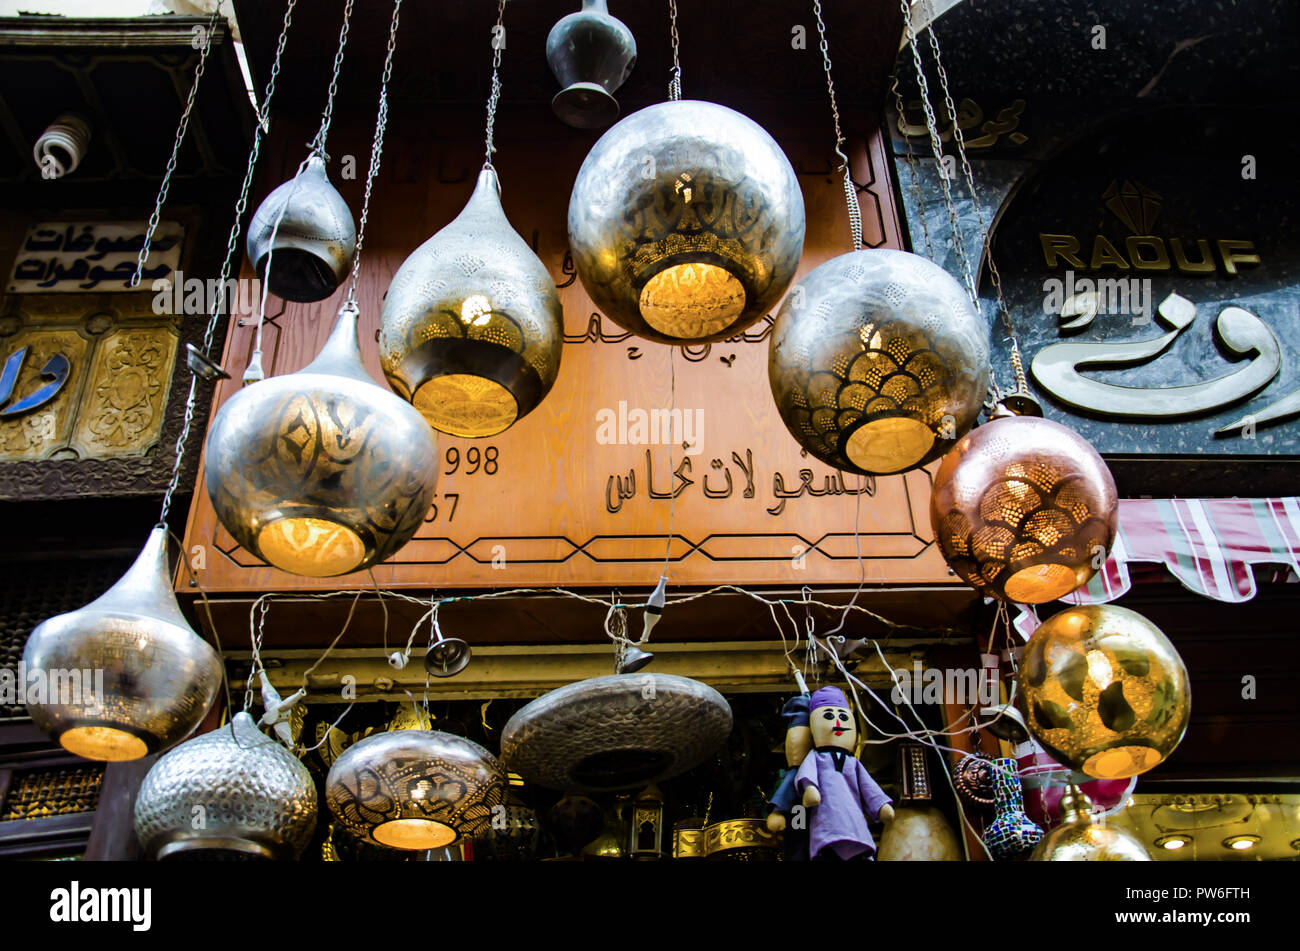 Cairo, Egypt - April 2018. Typical hand made Craftwork store in Cairo souk. Stock Photo